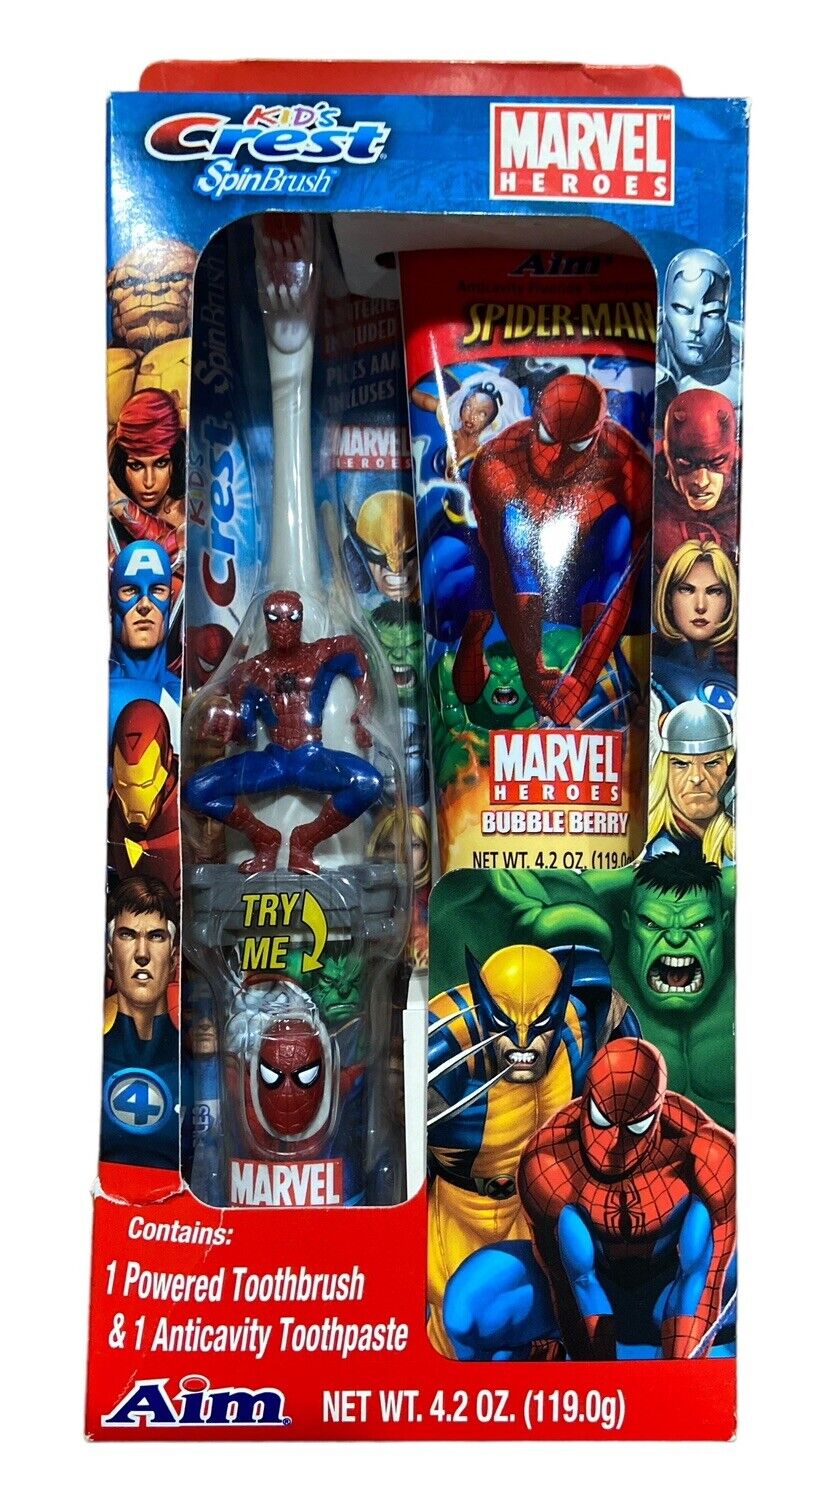 Marvel Heroes Kids Crest Spinbrush Toothbrush And Aim Toothpaste 2006 Gift Set